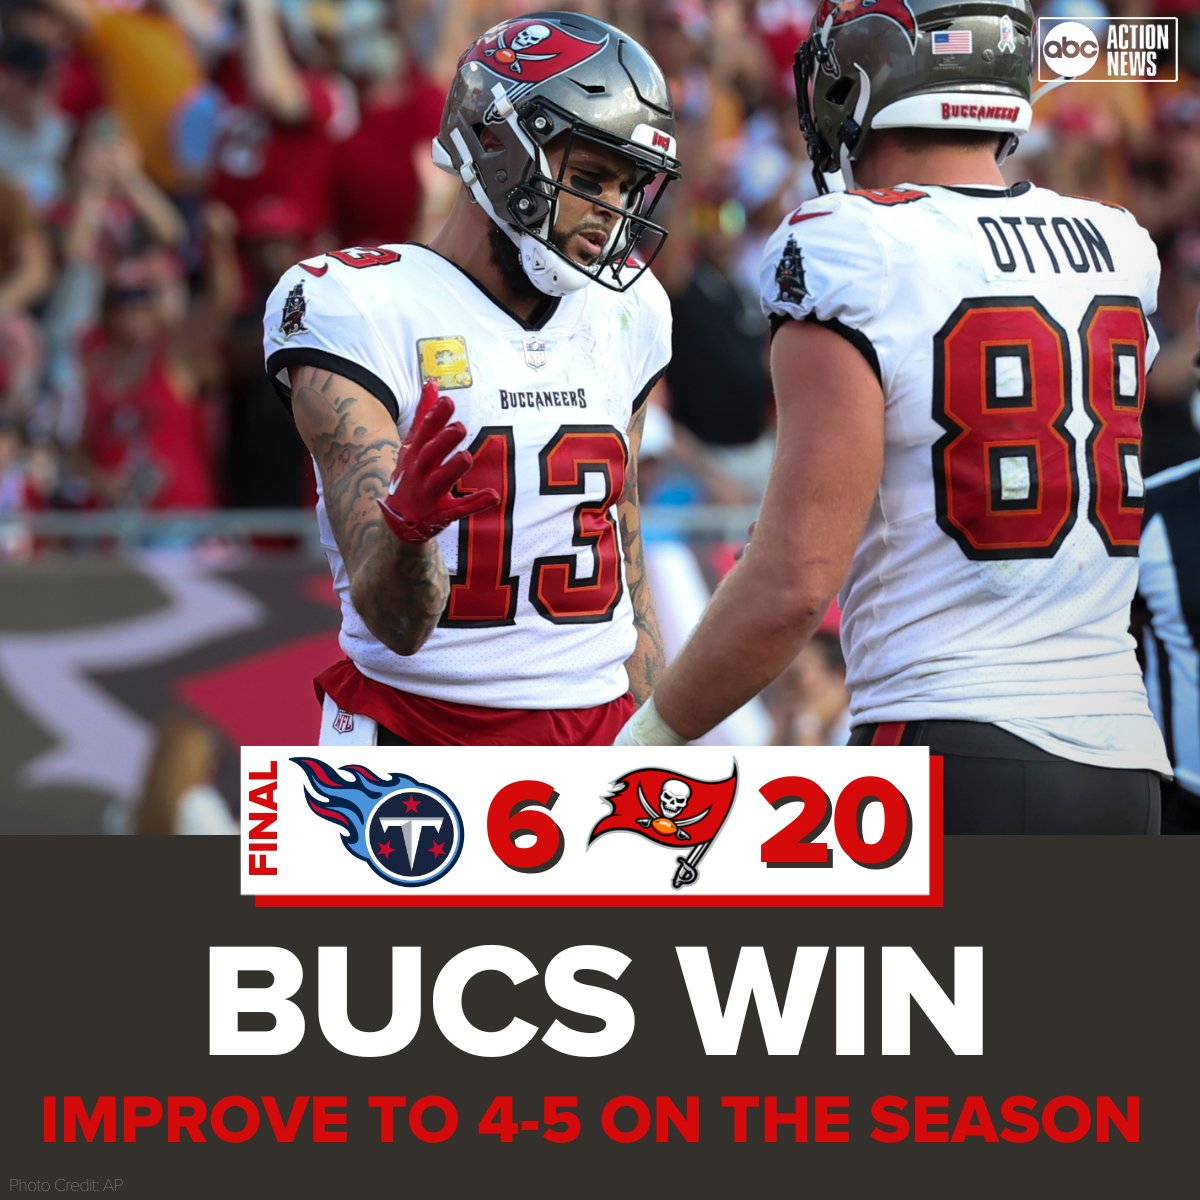 BUCS WIN | Powered by a 6-reception, 143-yard performance by Mike Evans, the Buccaneers improve to 4-5 with a home win against the Titans.